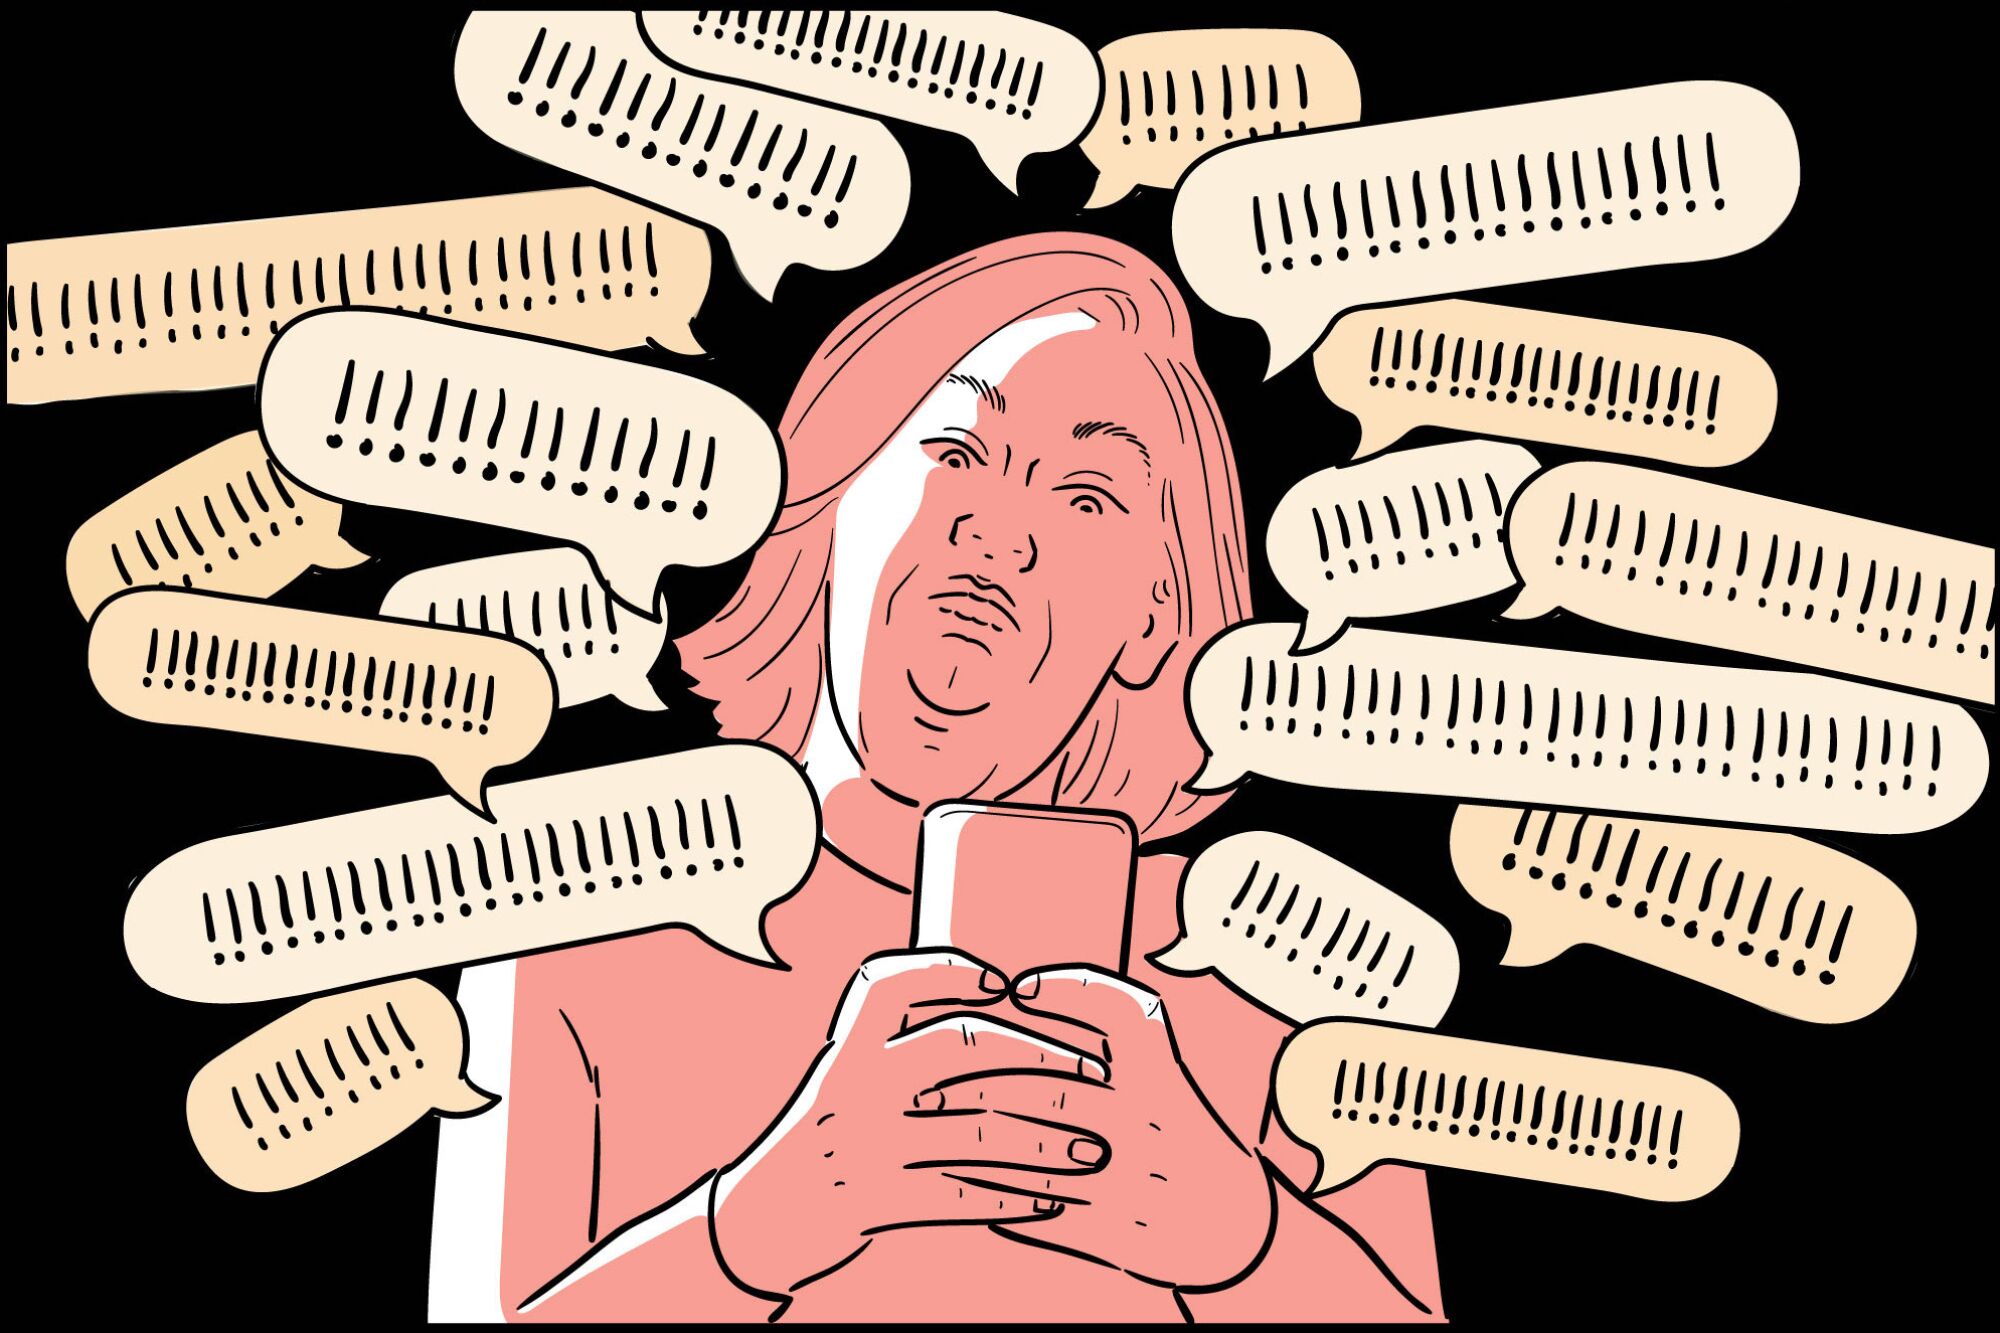 Illustration of a woman texting while surrounded by chat bubbles and exclamation points